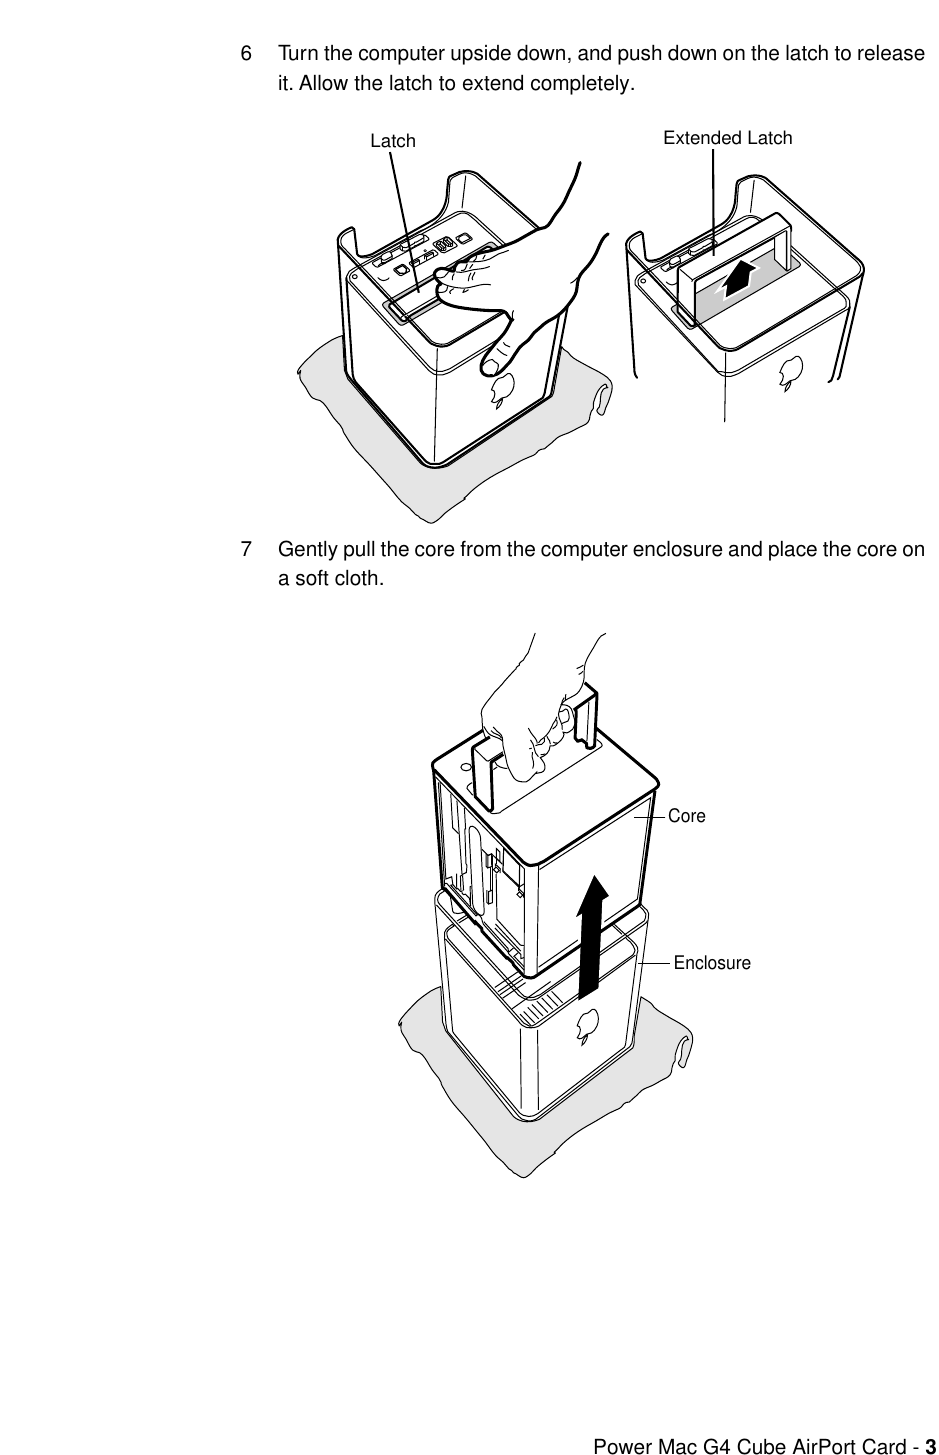    Power Mac G4 Cube AirPort Card -  3 6 Turn the computer upside down, and push down on the latch to release it. Allow the latch to extend completely.7 Gently pull the core from the computer enclosure and place the core on a soft cloth. Latch Extended LatchCoreEnclosure